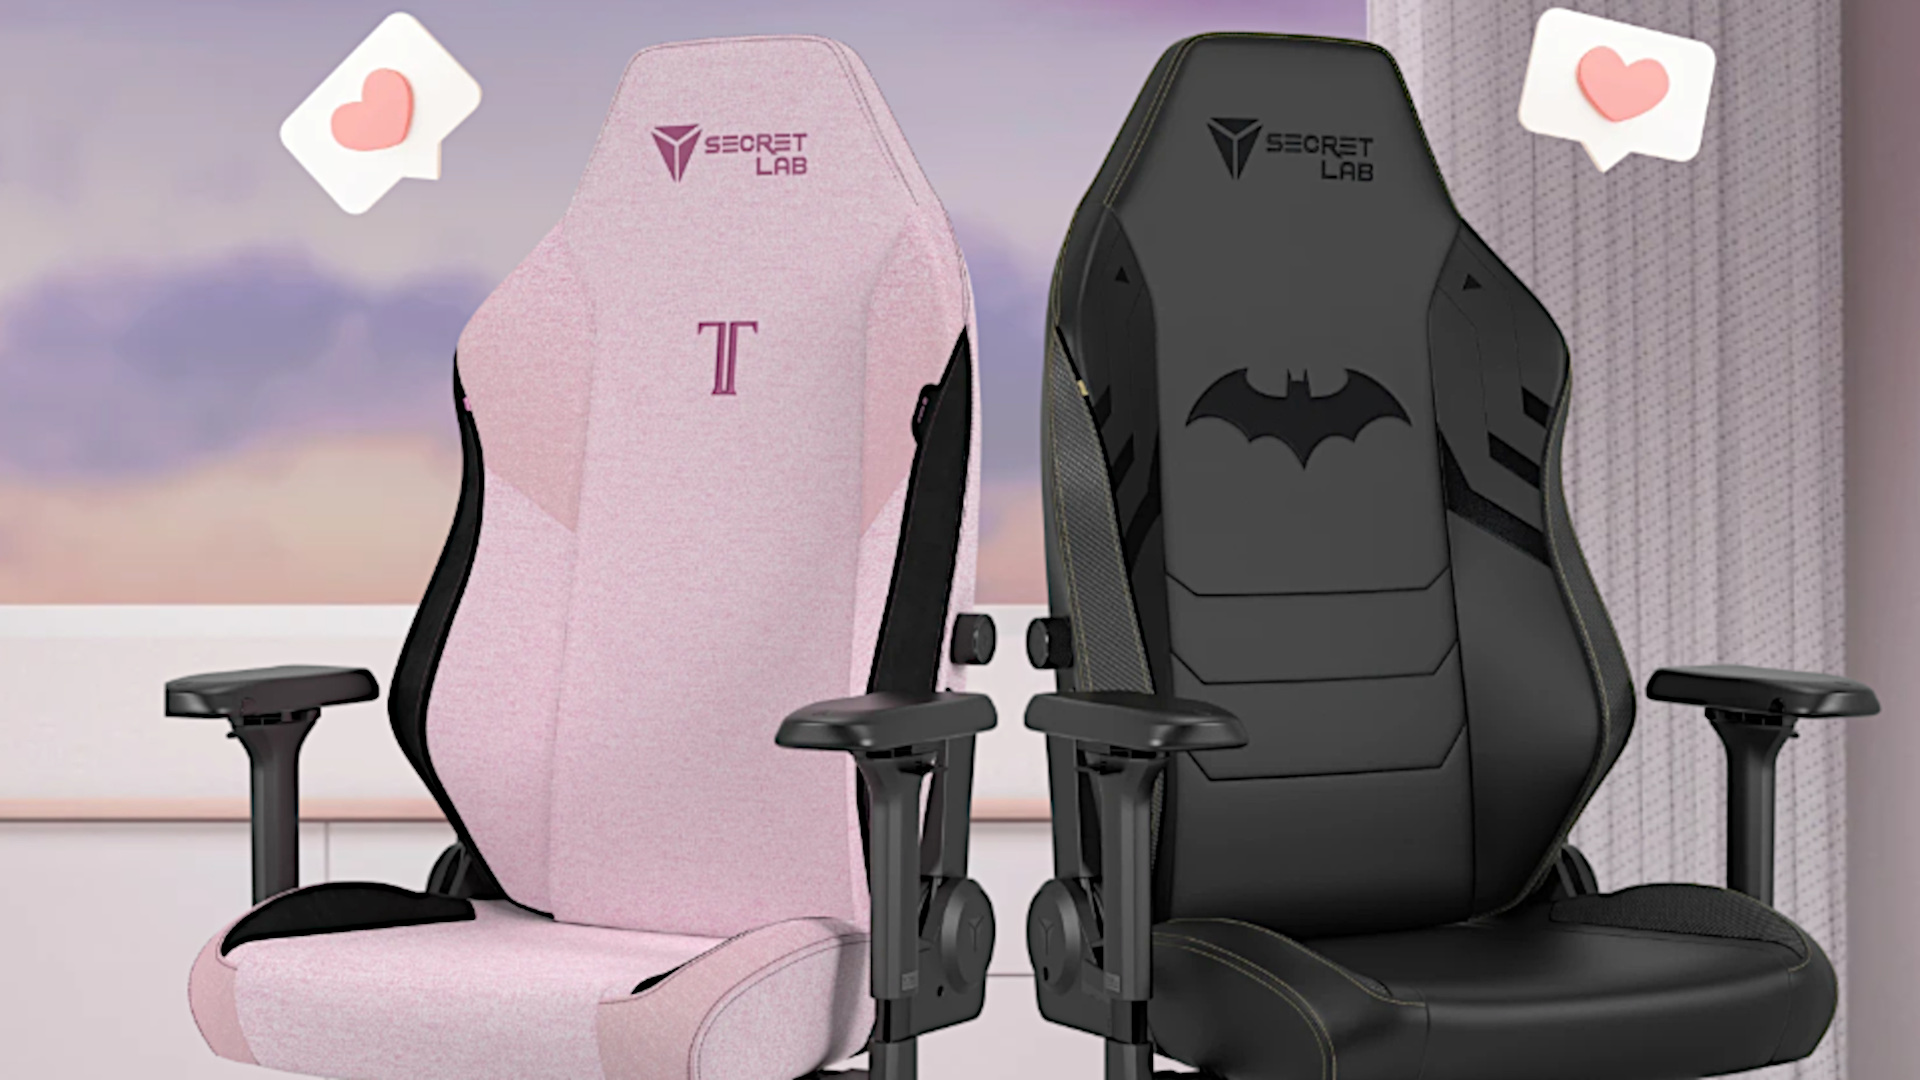 We're in love with the Secretlab Valentine's Day deals